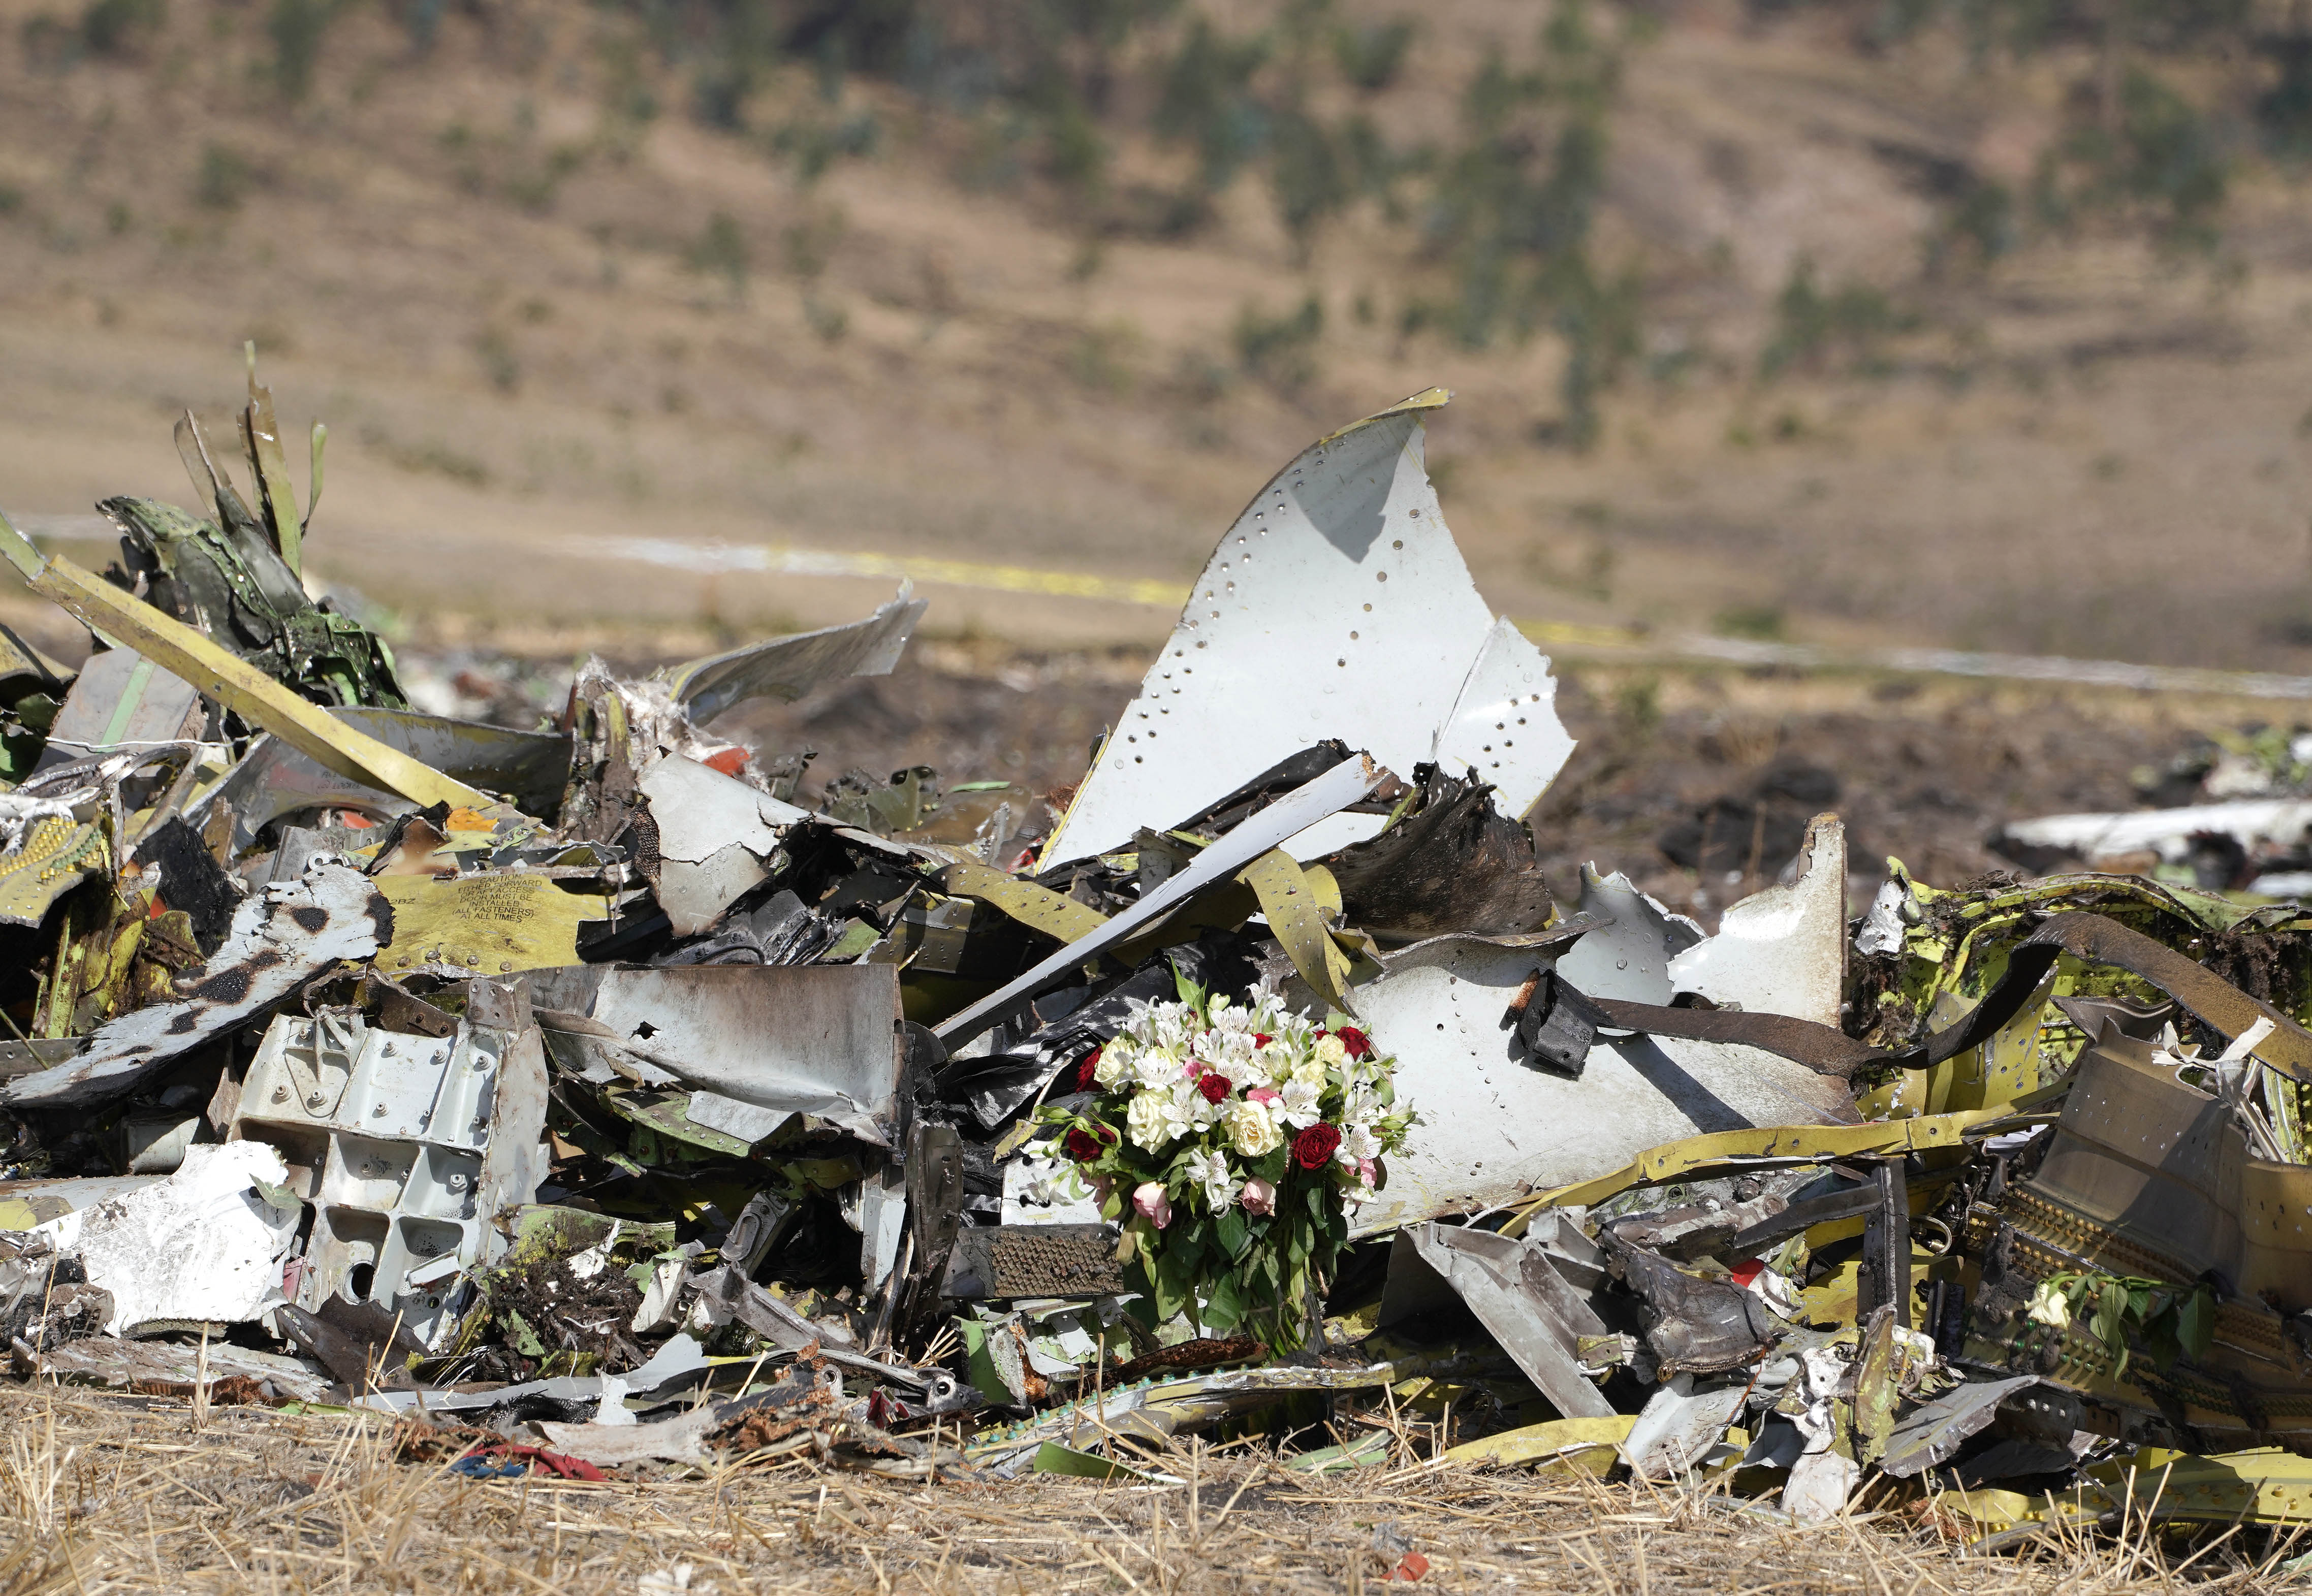 A bouquet of flowers beside debris at the scene of the Ethiopian Airlines Flight 302 in 2019